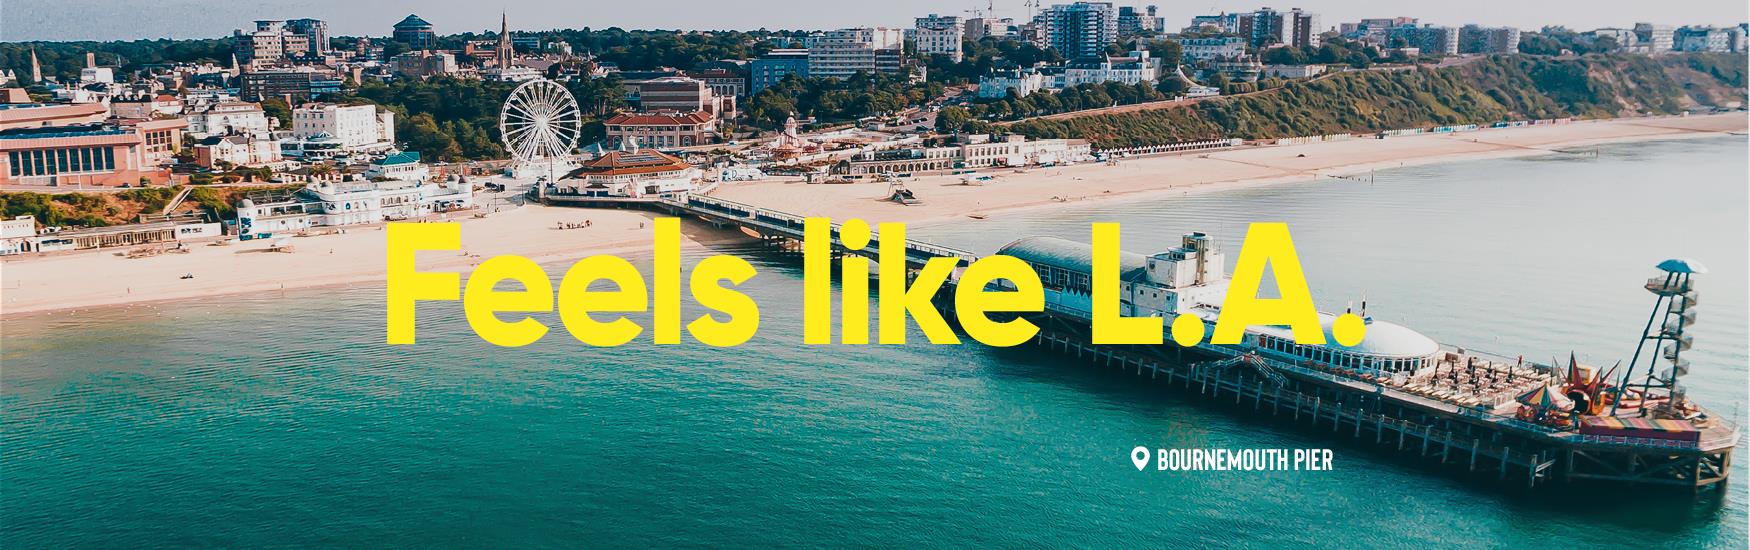 Aerial shot of Bournemouth Pier with text that reads "Feels like LA" overlaid